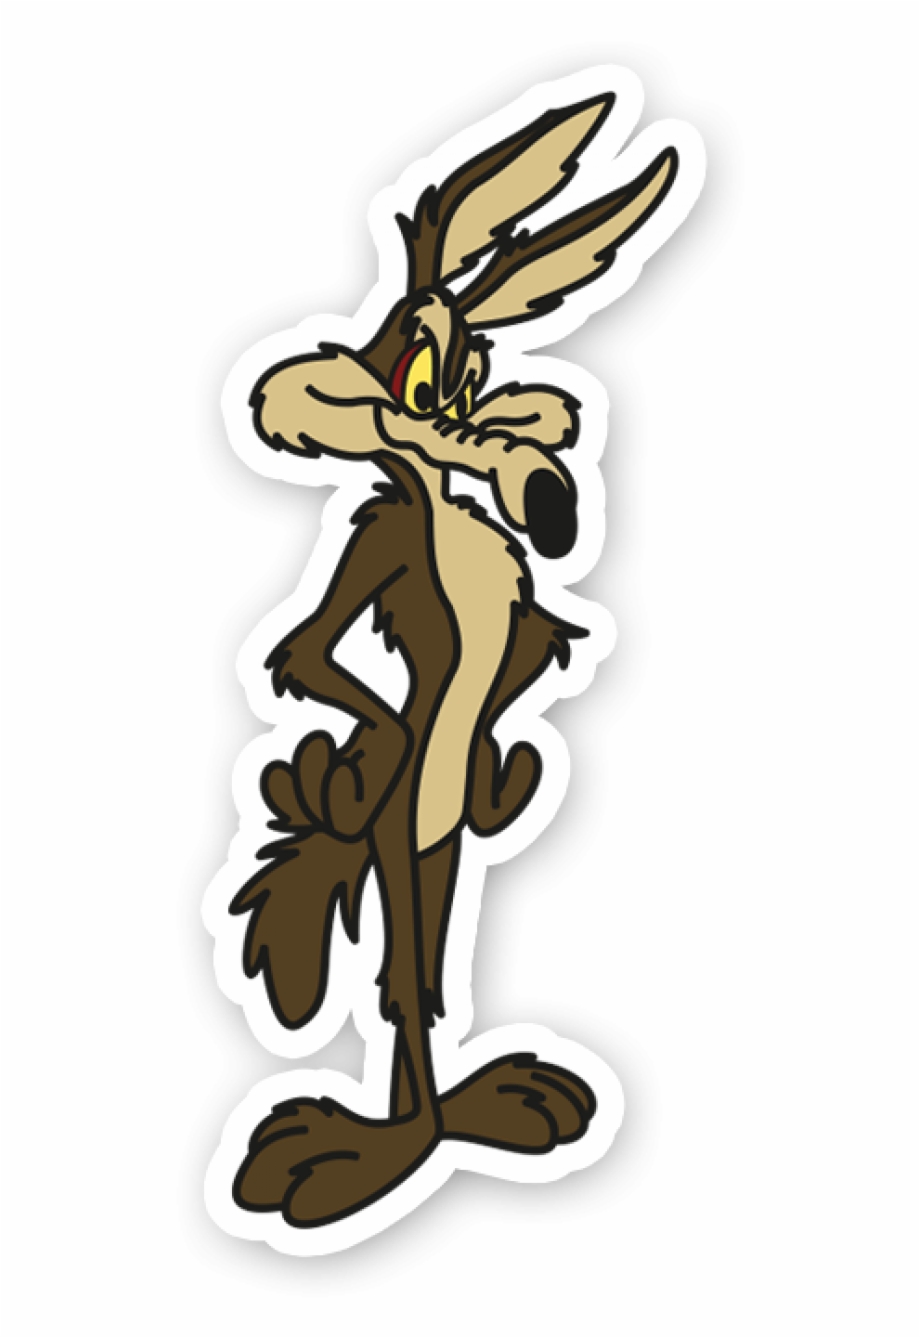 Willy Coyote